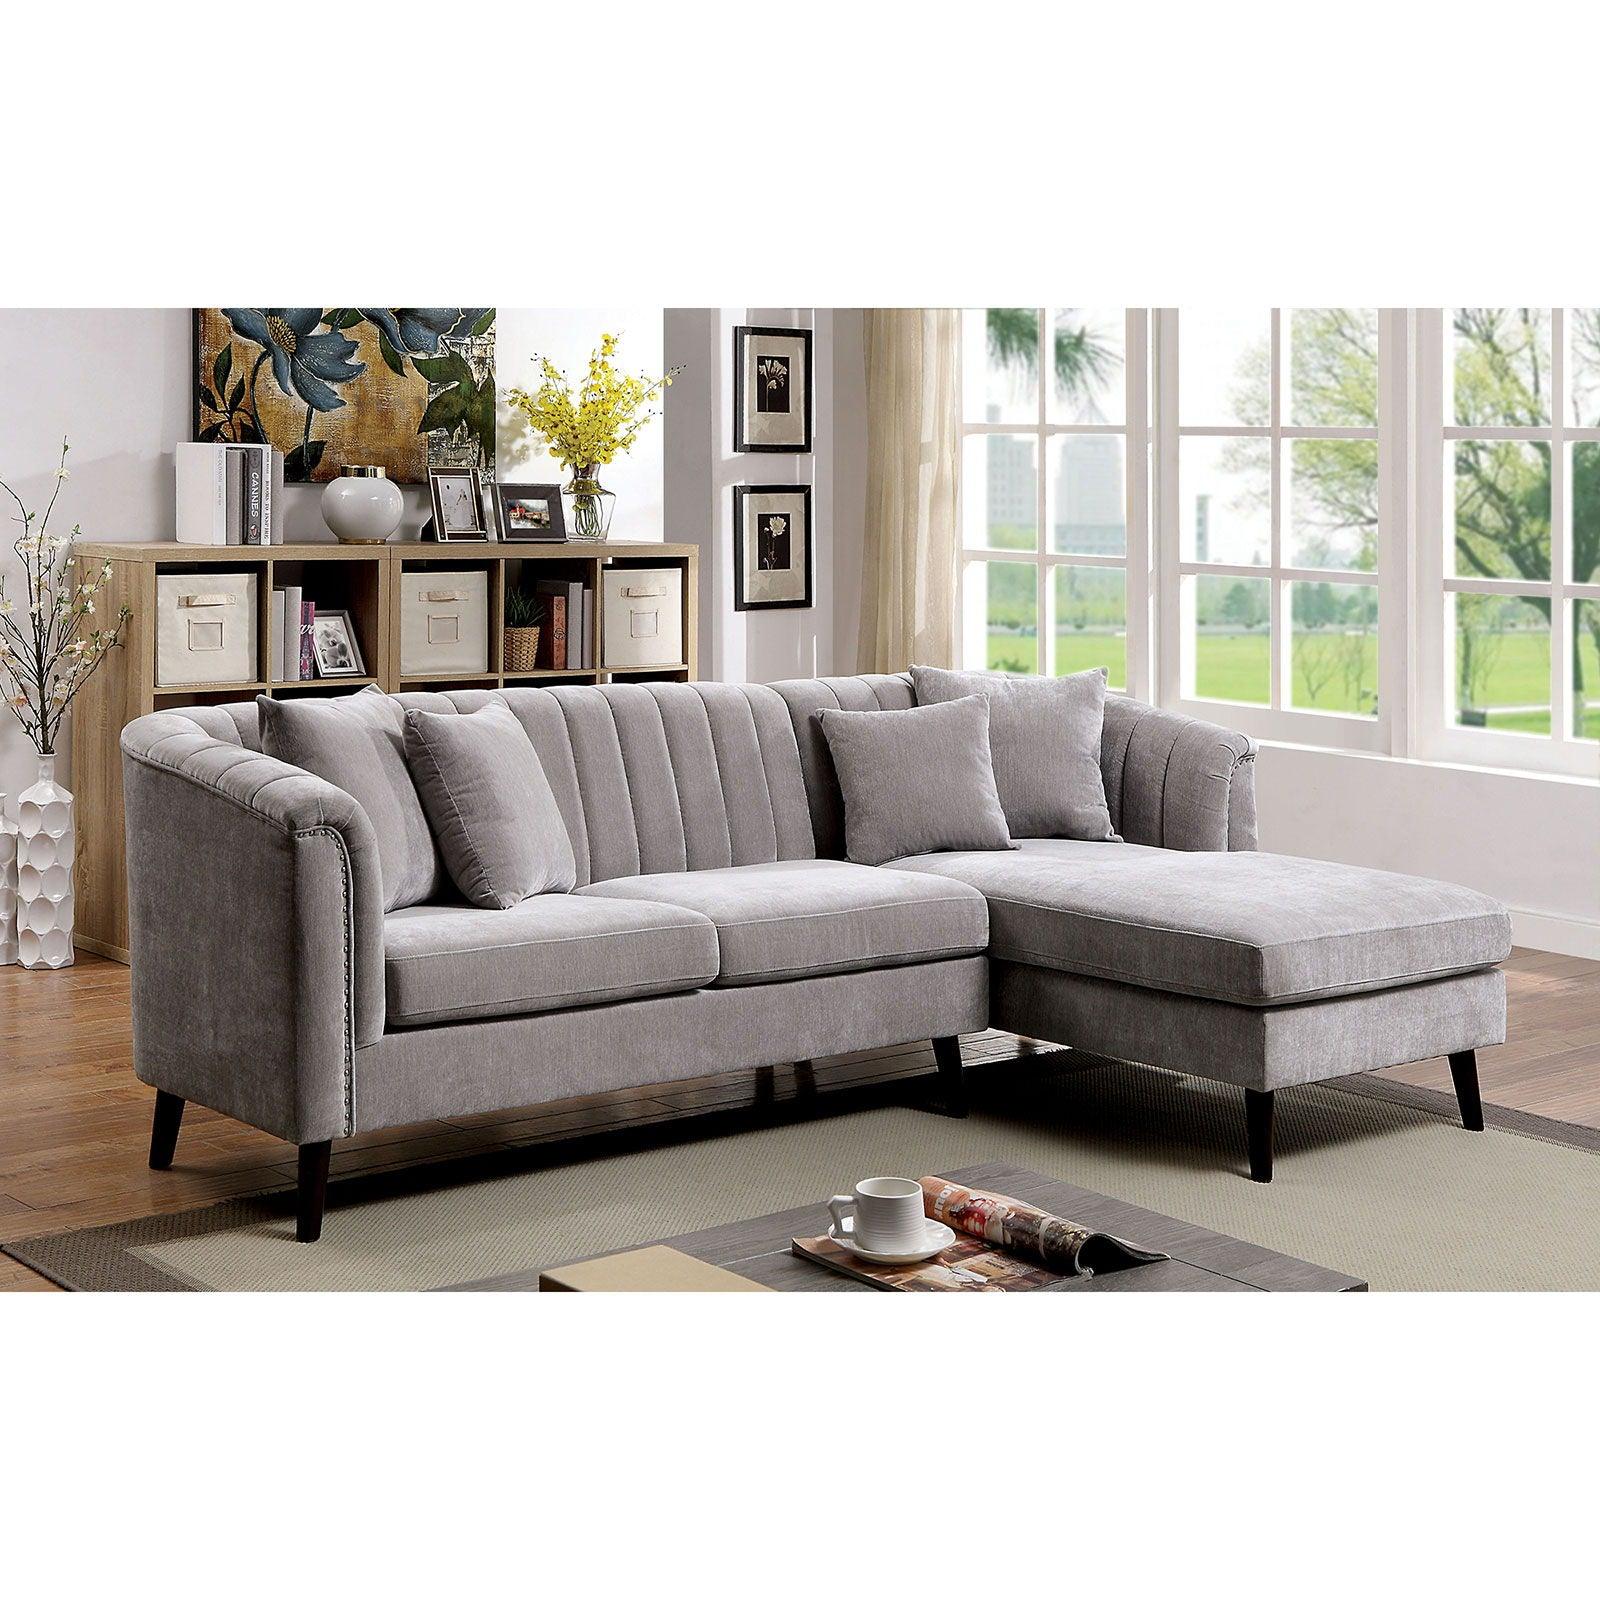 Furniture of America - Goodwick - Sectional - Light Gray - 5th Avenue Furniture